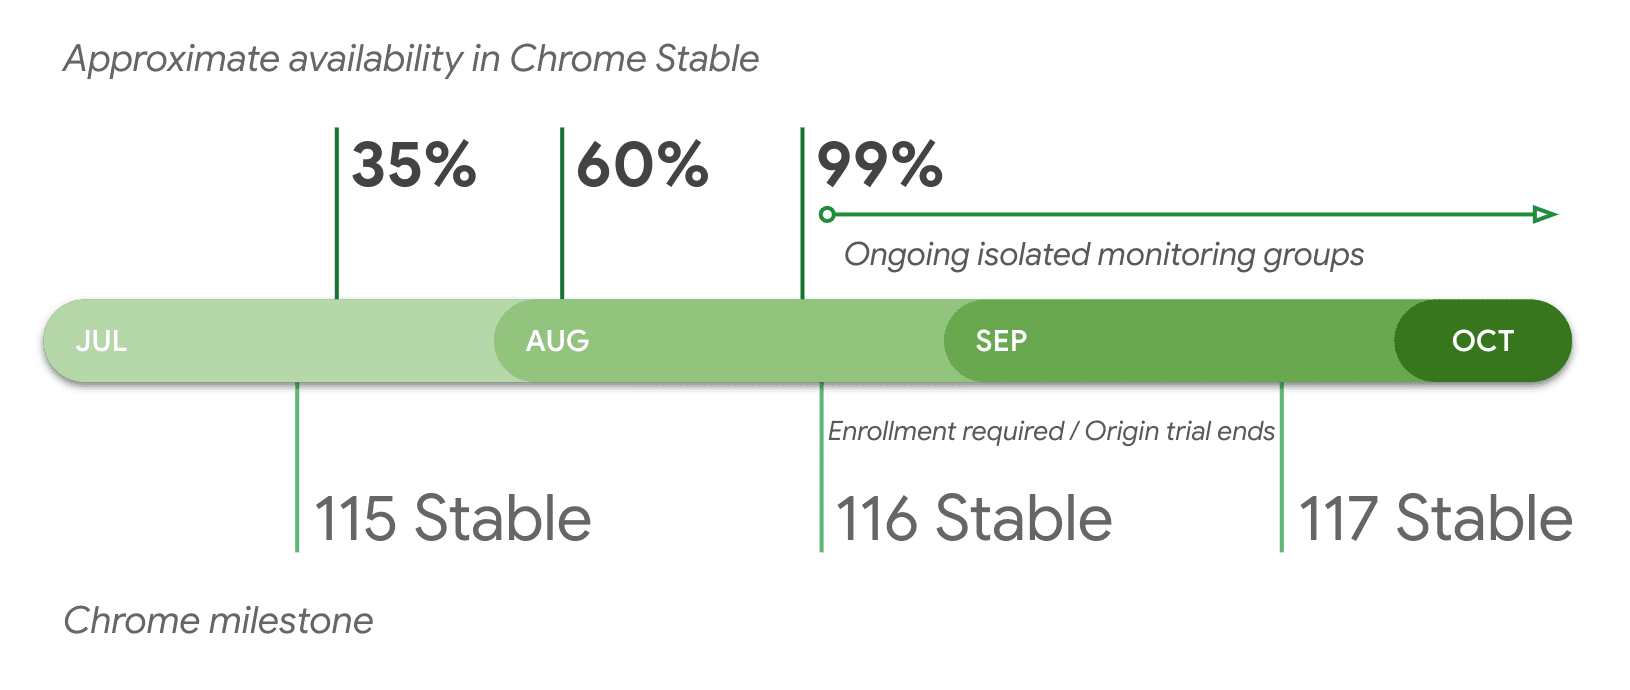 Approximate availability in Chrome Stable by version.